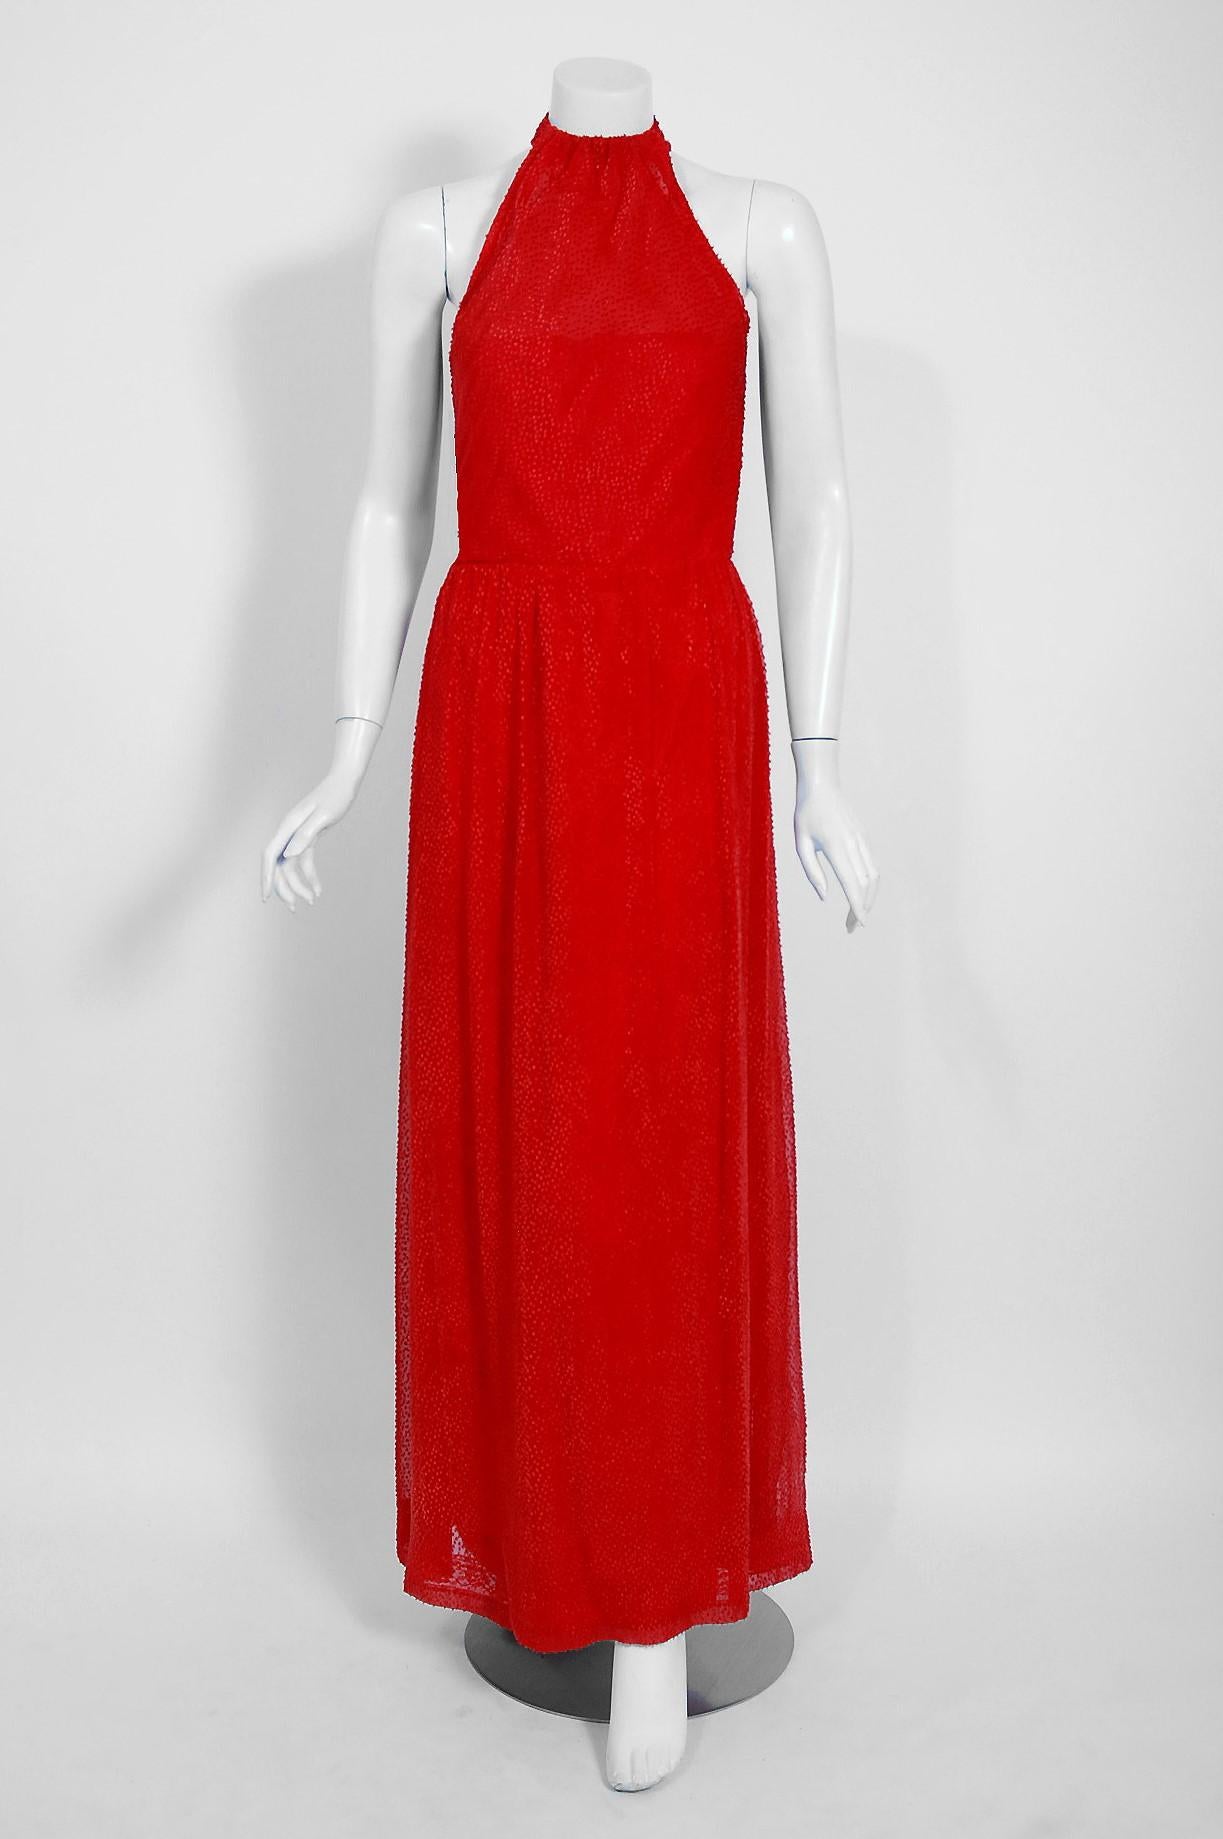 Givenchy, the name itself evokes glamour, refined elegance, simplicity and style. Givenchy's trademark of flowing lines and luxurious fabrics make his work easily recognizable. This gorgeous ruby-red goddess gown, dating back to the mid 1970's, is a